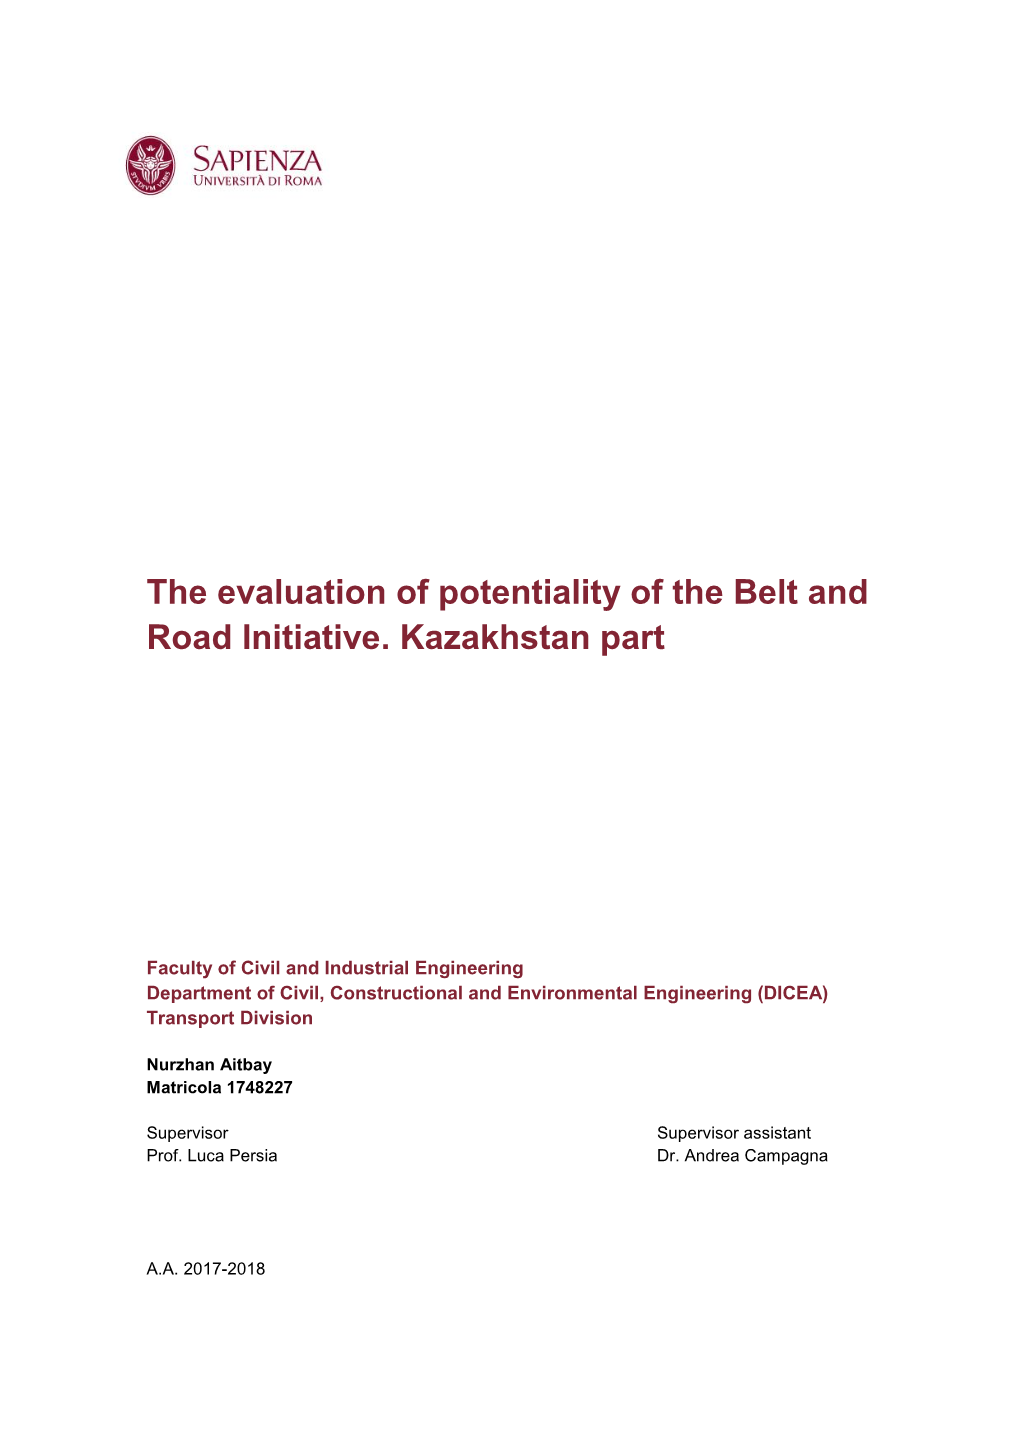 The Evaluation of Potentiality of the Belt and Road Initiative. Kazakhstan Part